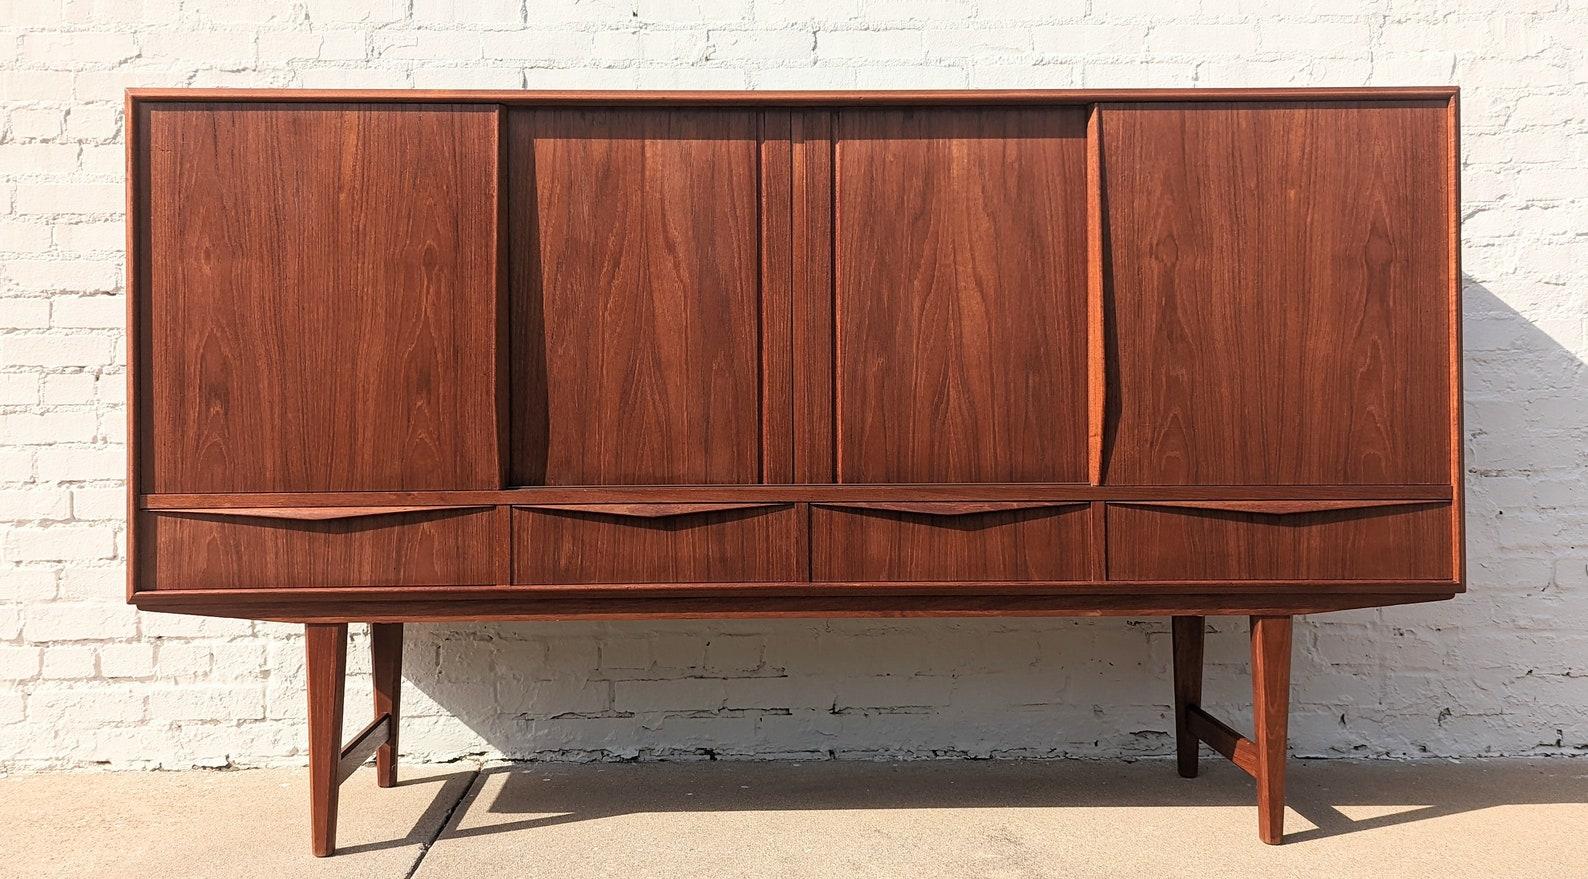 Mid Century Danish Modern Teak Cabinet

Above average vintage condition and structurally sound. Has some expected slight finish wear and scratching. Has a couple edge dings. Beautifully crafted. Outdoor listing pictures might appear slightly darker